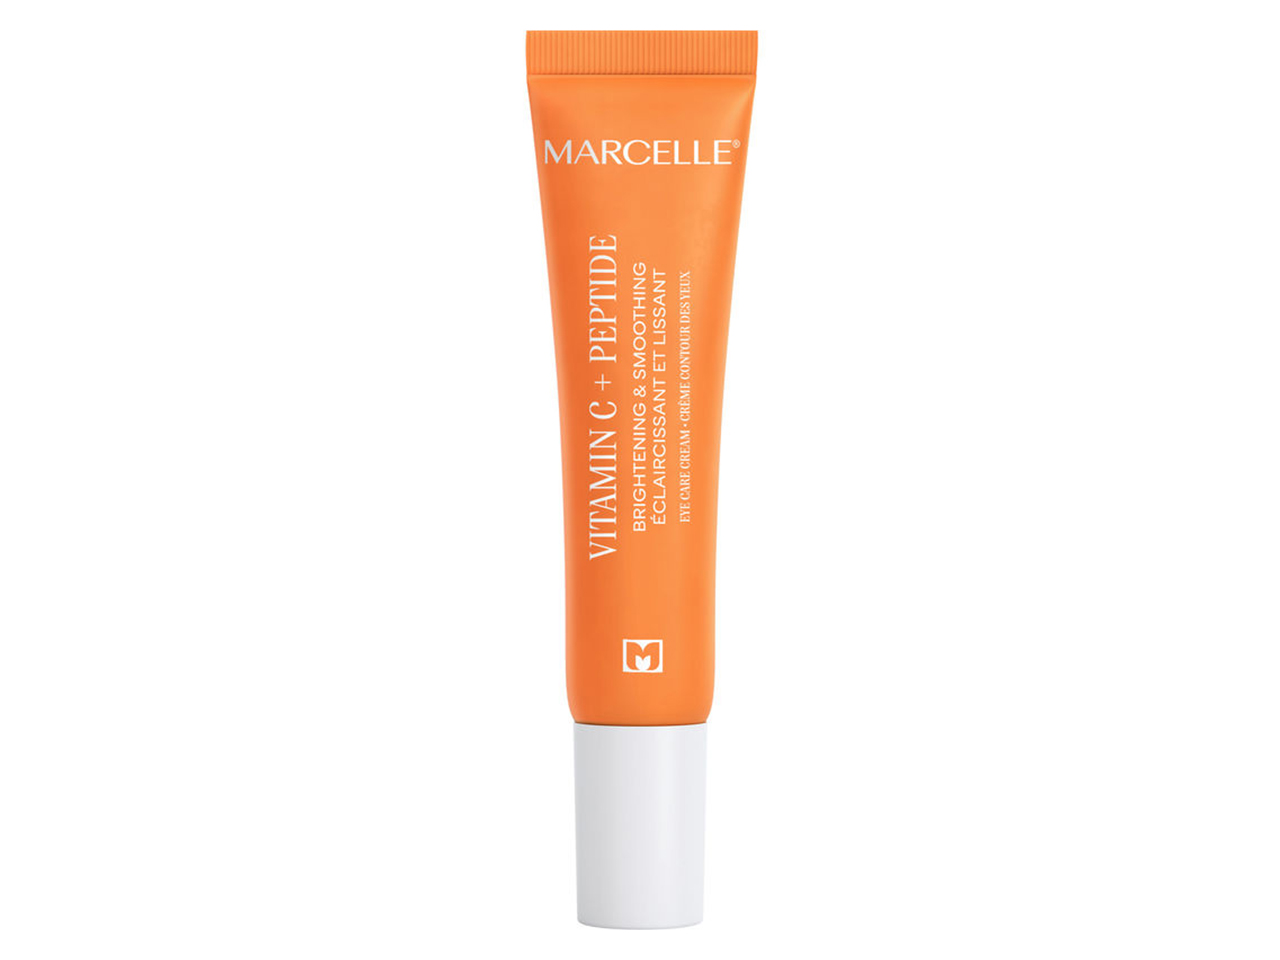 Marcelle Vitamin C + Peptide Brightening & Smoothing Eye Care Cream